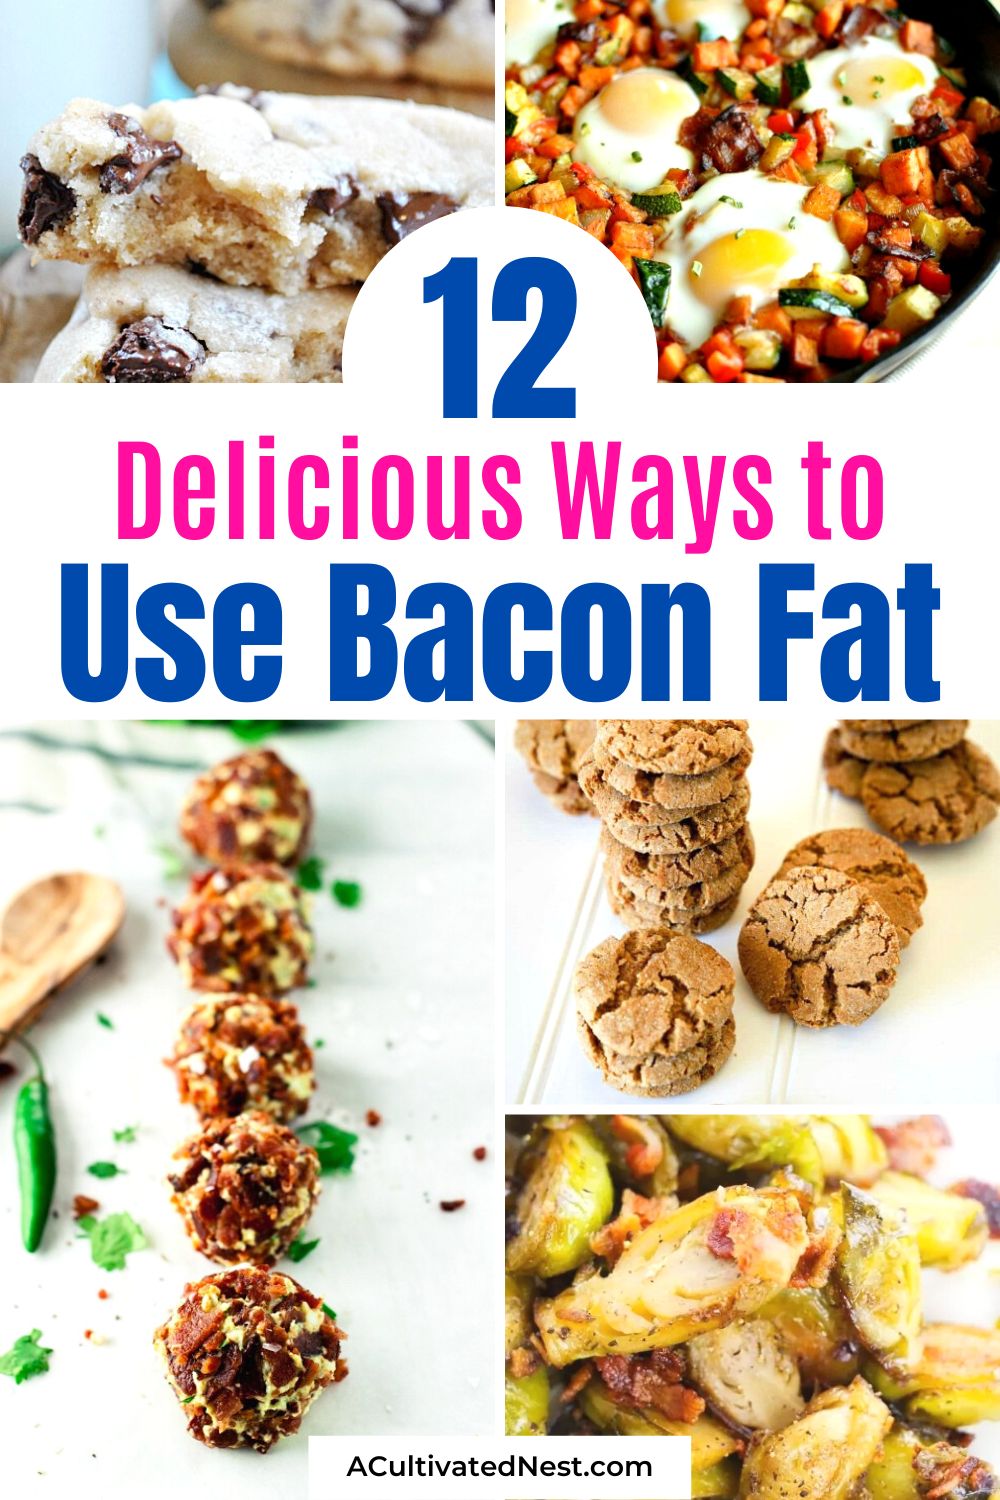 12 Delicious Ways to Use Bacon Fat- Have bacon fat left over from cooking up some tasty bacon? Don't throw it out! Instead, check out all of these delicious ways to use bacon fat and make something mouthwatering instead! | bacon-flavored recipes, baccon desserts, what to do with bacon grease, #baconRecipes #recipeIdeas #frugal #desserts #ACultivatedNest